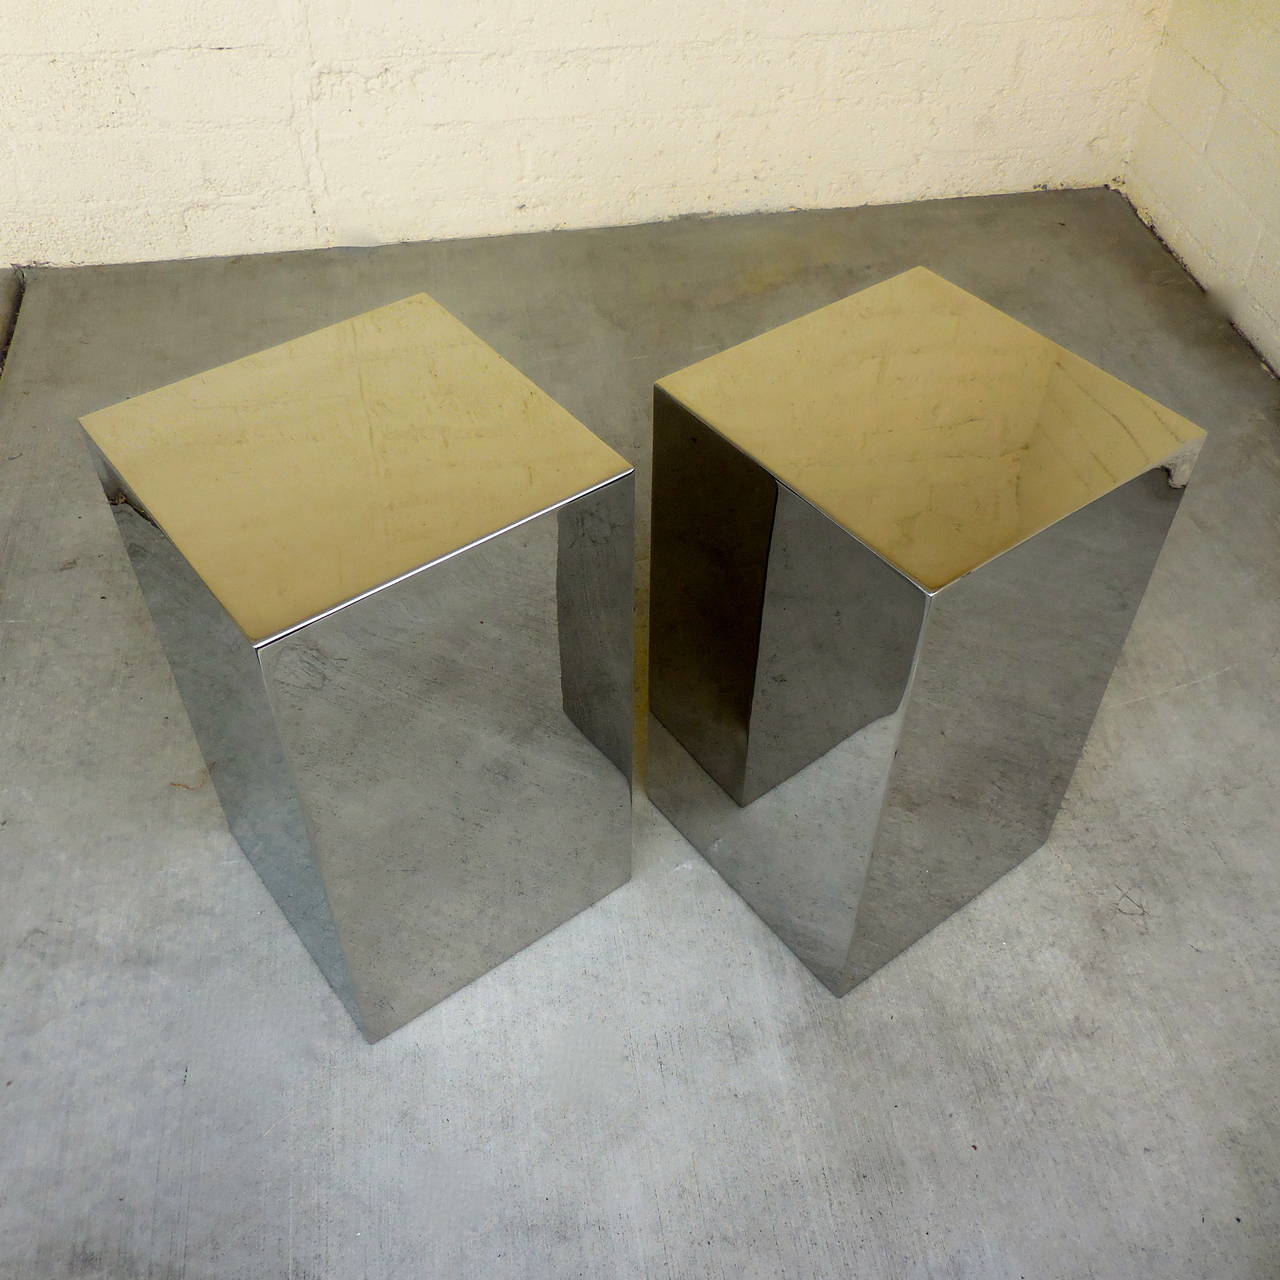 A sleek pair of stainless steel square occasional tables that have been polished to a mirror finish. They date from the 1970s and are in excellent, restored condition.